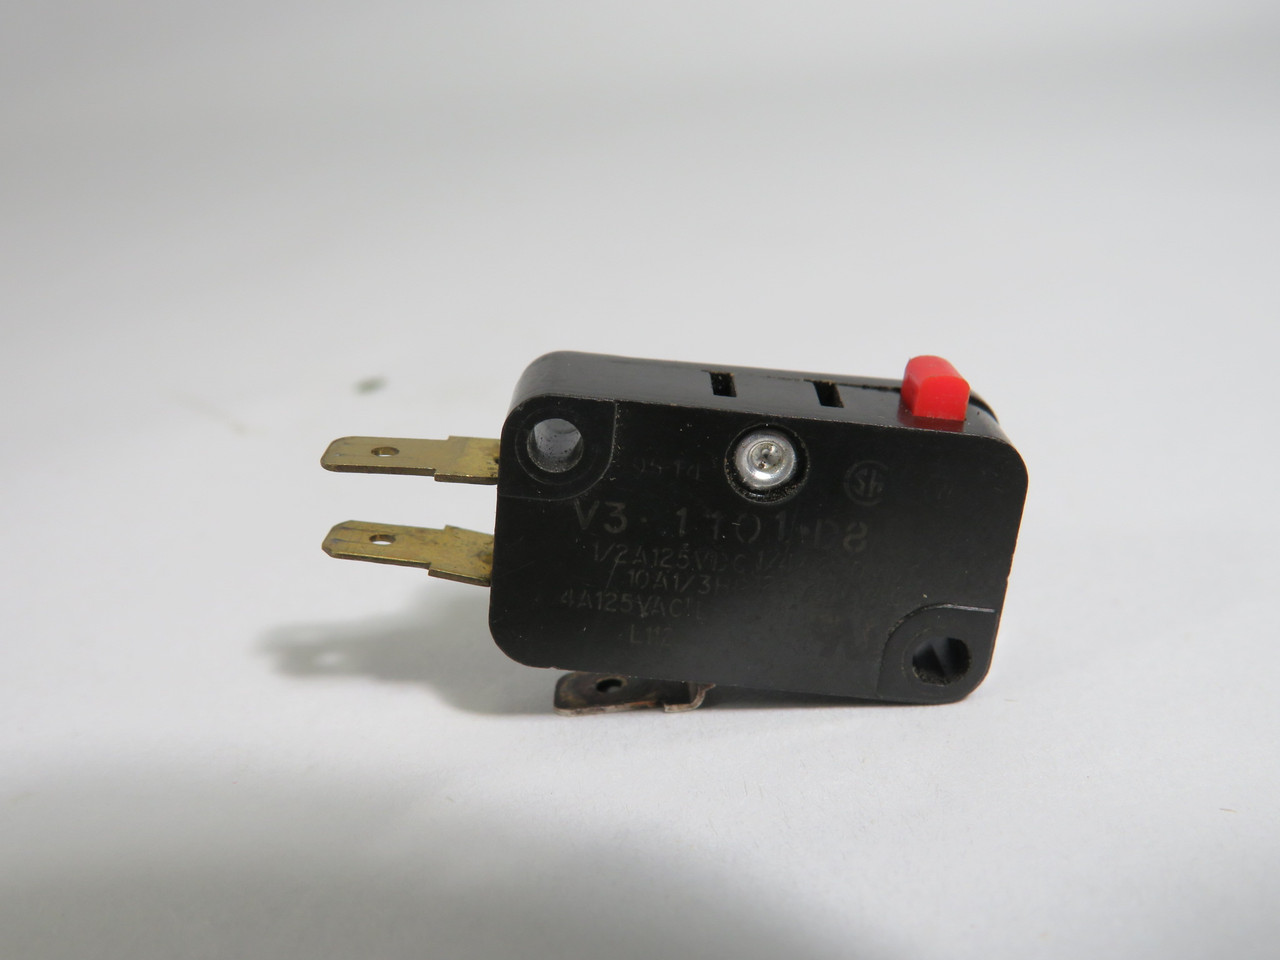 Microswitch V3-1101-D8 Limit Switch 10A 1/3HP 125/250VAC 1/2A 125VDC USED